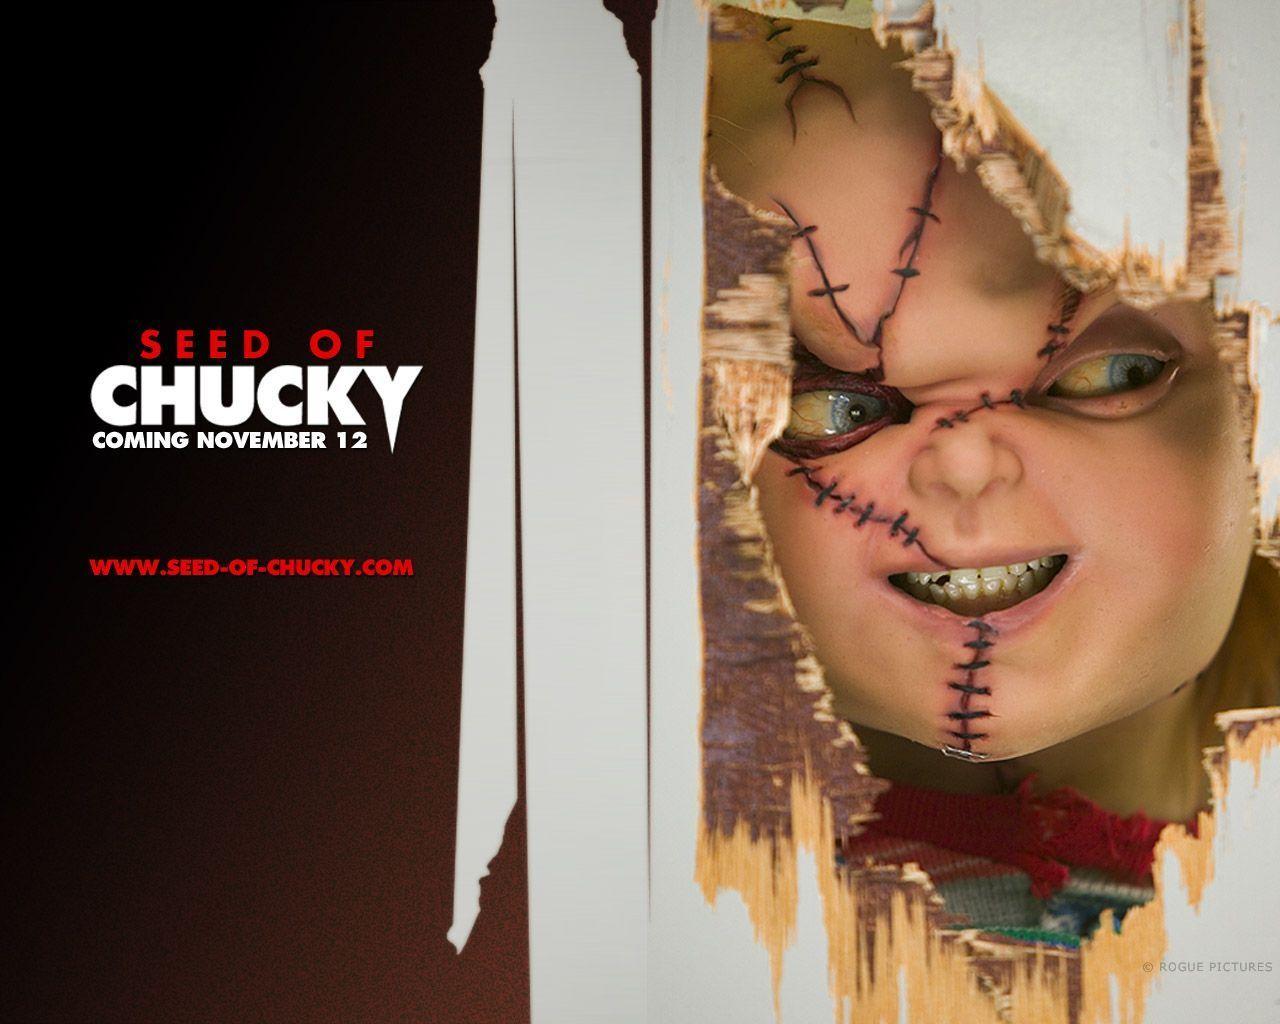 Seed of Chucky Pictrures. New image. HD new image. photo